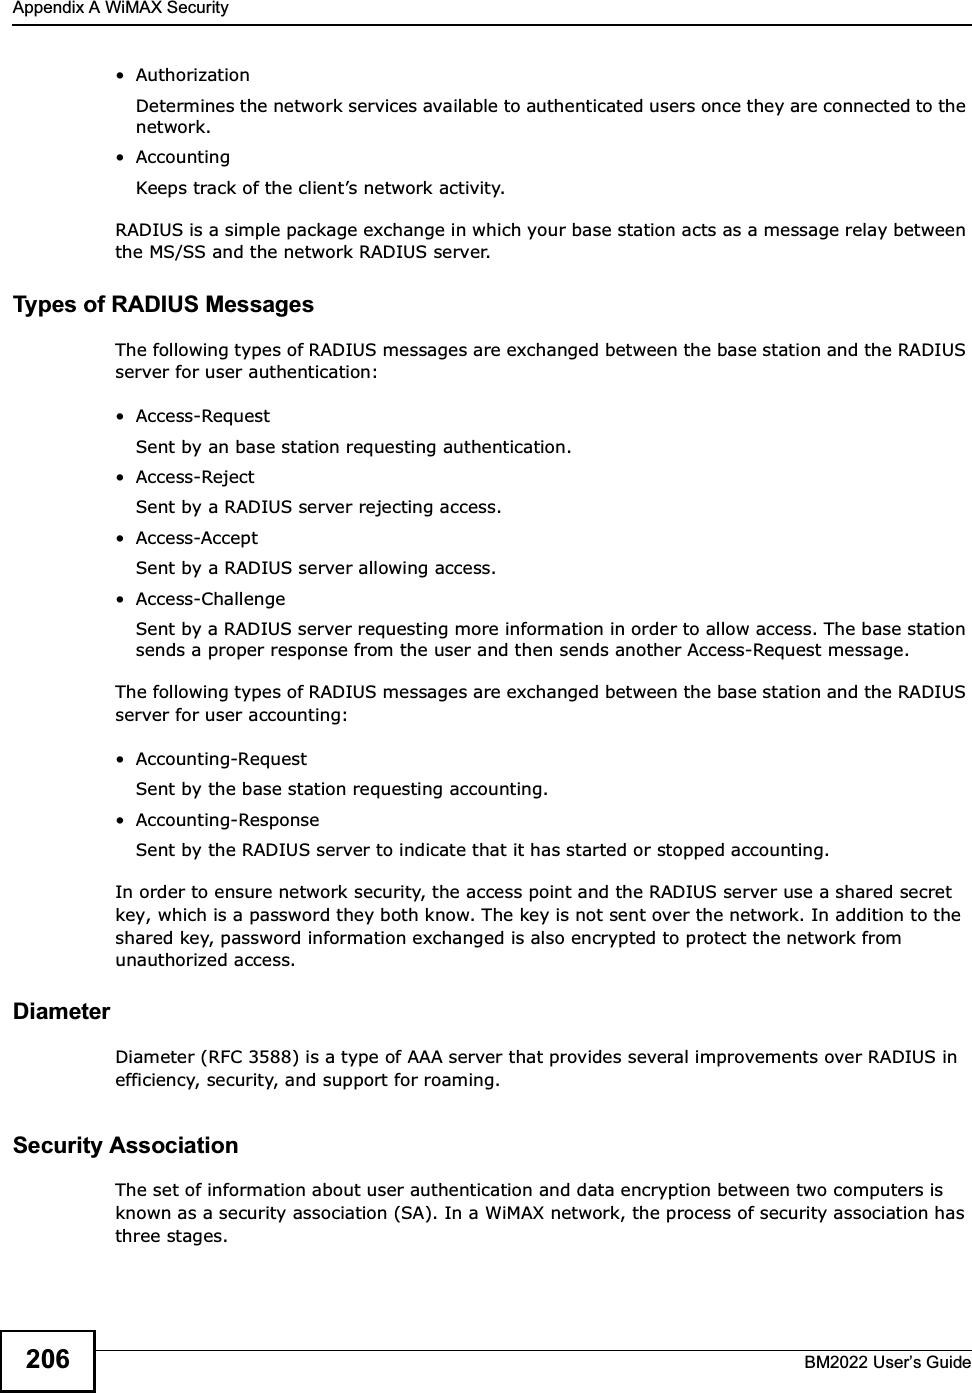 Appendix A WiMAX SecurityBM2022 Users Guide206 AuthorizationDetermines the network services available to authenticated users once they are connected to the network. AccountingKeeps track of the clients network activity. RADIUS is a simple package exchange in which your base station acts as a message relay between the MS/SS and the network RADIUS server. Types of RADIUS MessagesThe following types of RADIUS messages are exchanged between the base station and the RADIUS server for user authentication: Access-RequestSent by an base station requesting authentication. Access-RejectSent by a RADIUS server rejecting access. Access-AcceptSent by a RADIUS server allowing access.  Access-ChallengeSent by a RADIUS server requesting more information in order to allow access. The base station sends a proper response from the user and then sends another Access-Request message. The following types of RADIUS messages are exchanged between the base station and the RADIUS server for user accounting: Accounting-RequestSent by the base station requesting accounting. Accounting-ResponseSent by the RADIUS server to indicate that it has started or stopped accounting. In order to ensure network security, the access point and the RADIUS server use a shared secret key, which is a password they both know. The key is not sent over the network. In addition to the shared key, password information exchanged is also encrypted to protect the network from unauthorized access. DiameterDiameter (RFC 3588) is a type of AAA server that provides several improvements over RADIUS in efficiency, security, and support for roaming. Security AssociationThe set of information about user authentication and data encryption between two computers is known as a security association (SA). In a WiMAX network, the process of security association has three stages.